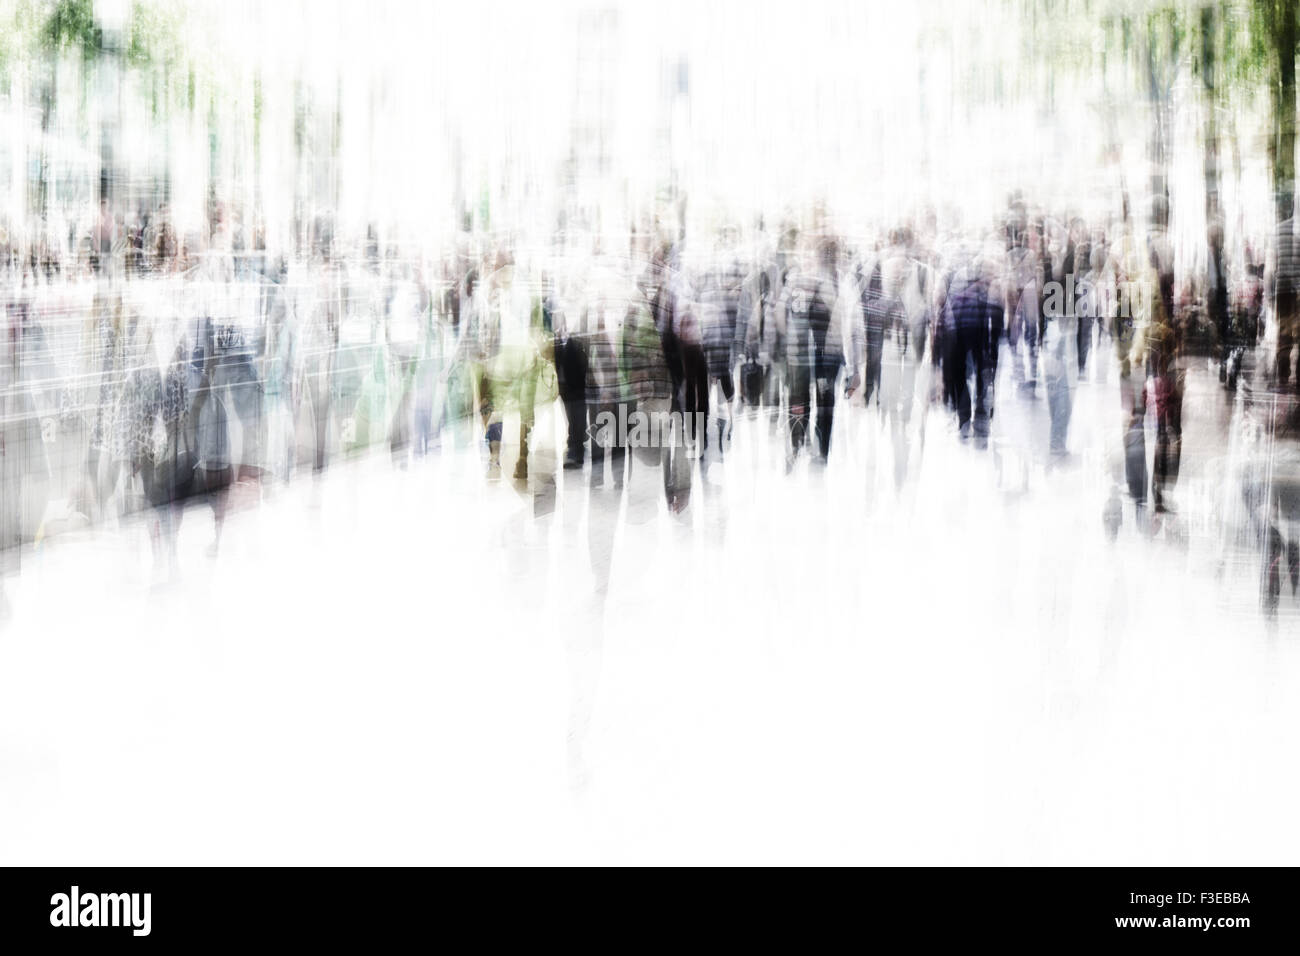 unrecognizable crowd of people walking in pedestrian zone with motion blur Stock Photo